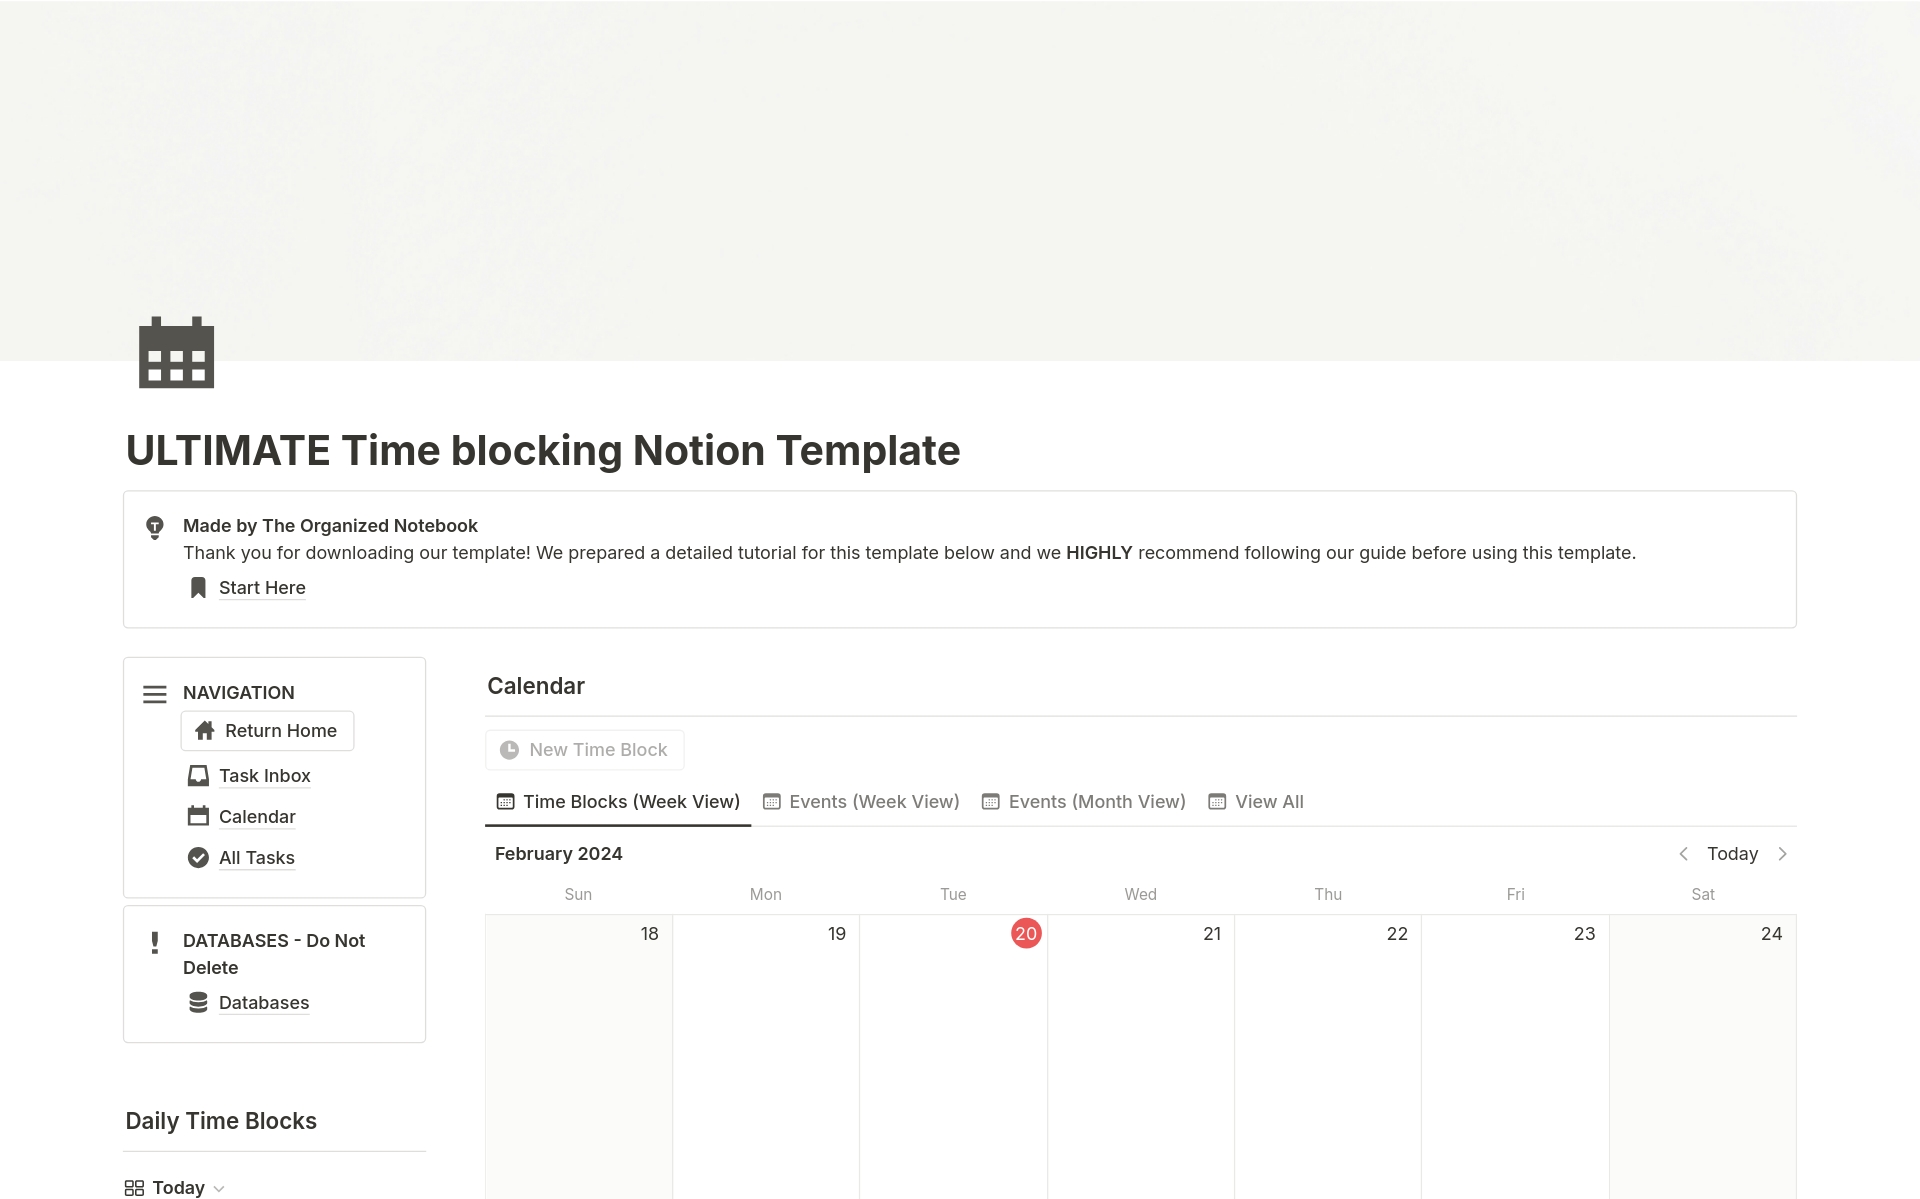 ⏱️ Time blocking is one of the best time management methods if you want to keep your focus and stay intentional about your time. Especially with the new update from Notion Calendar, Notion can be a great tool to time block, plan, and schedule your day.